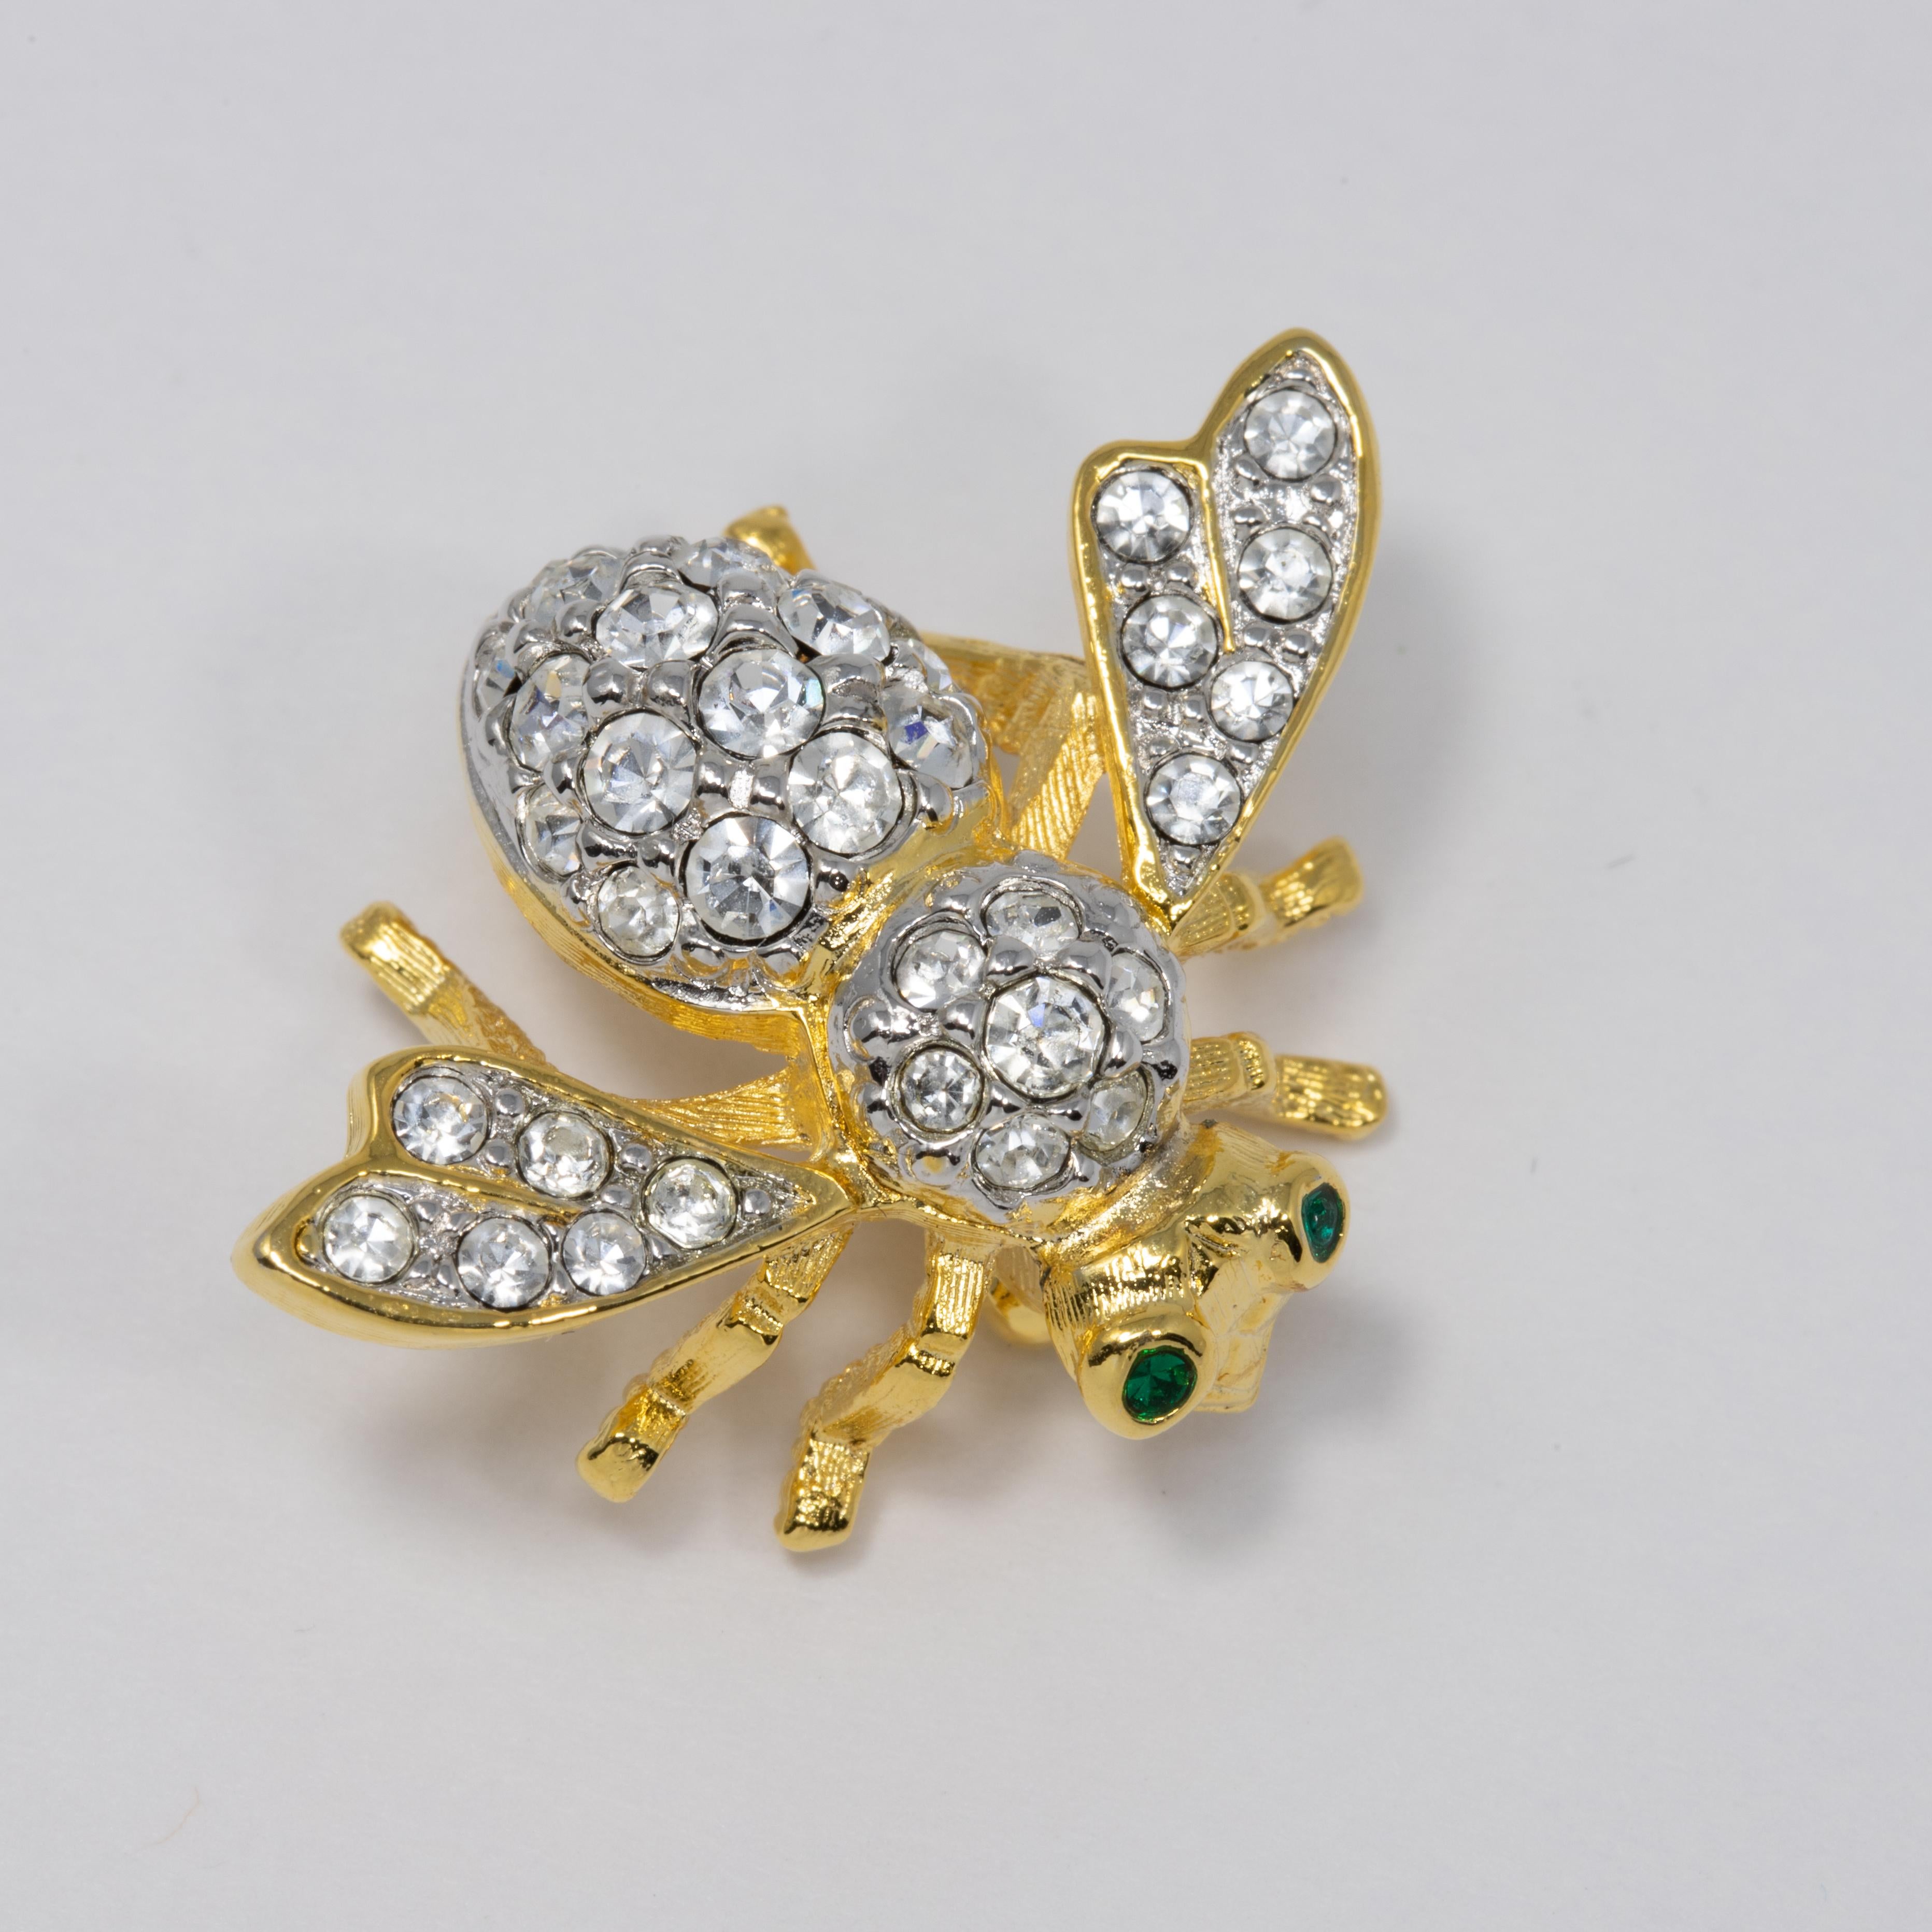 An exquisite pin, featuring a pave clear-crystal gold plated bee.

Hallmarks: Joan Rivers